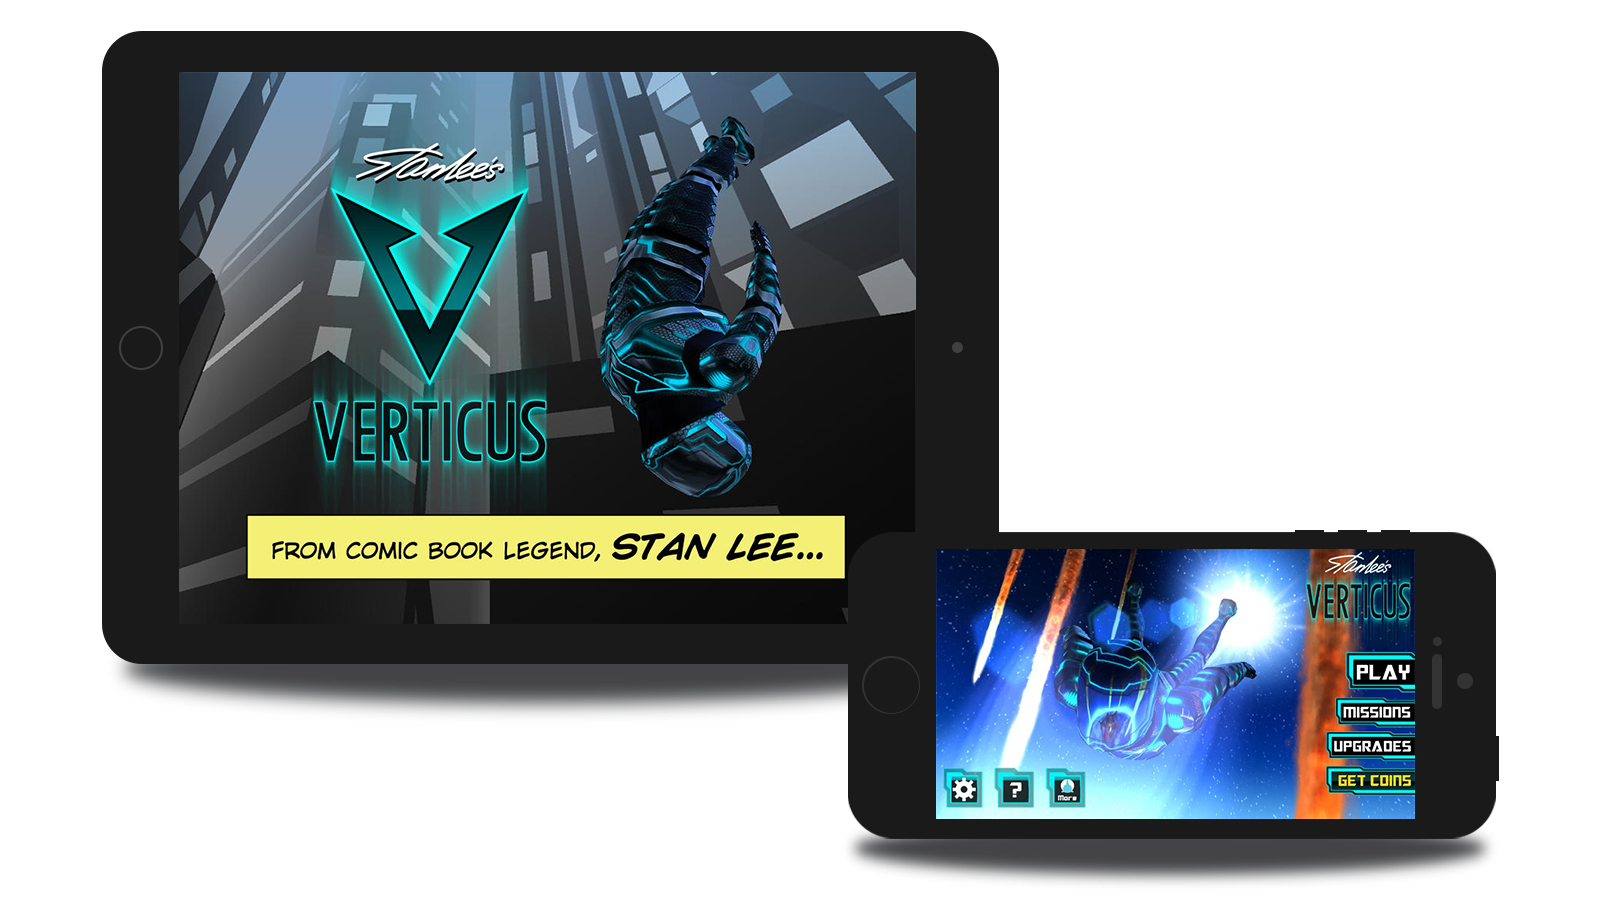 iPad and iPhone screen mockups of Verticus, a mobile game for iOS.